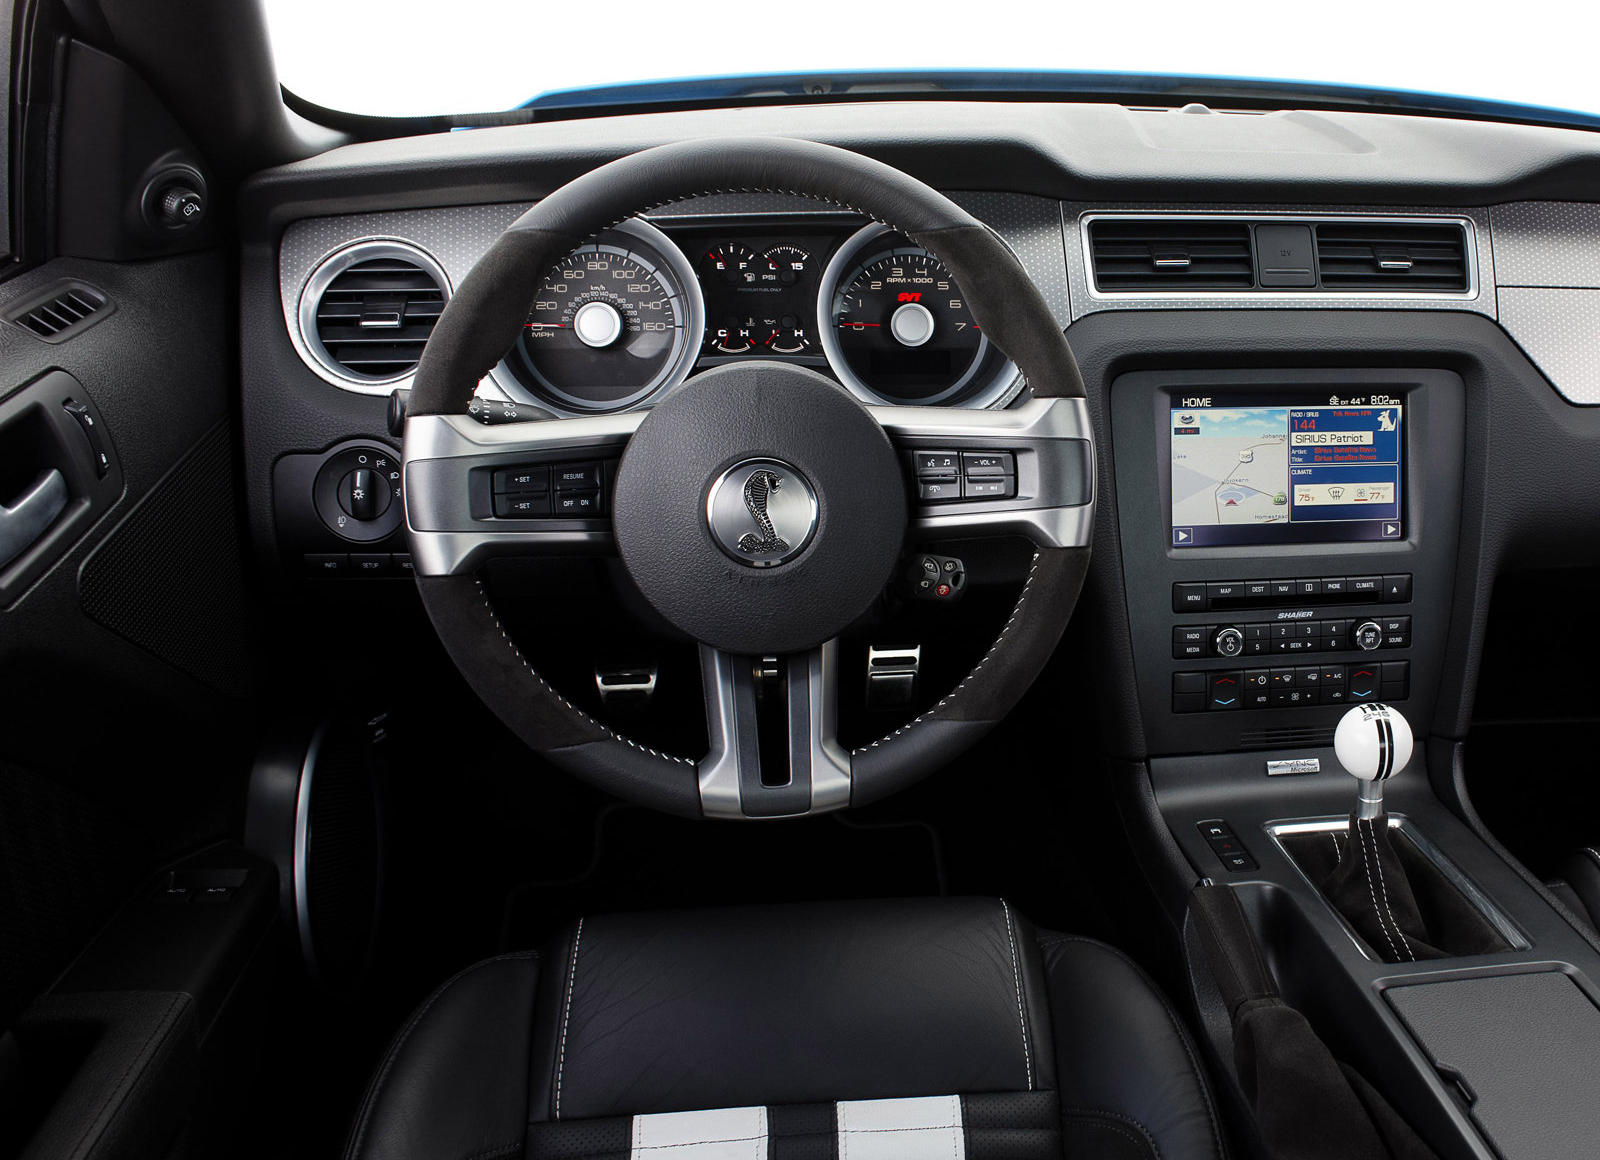 ethical Six lotus 2012 Ford Mustang Shelby GT500 Interior Photos | CarBuzz